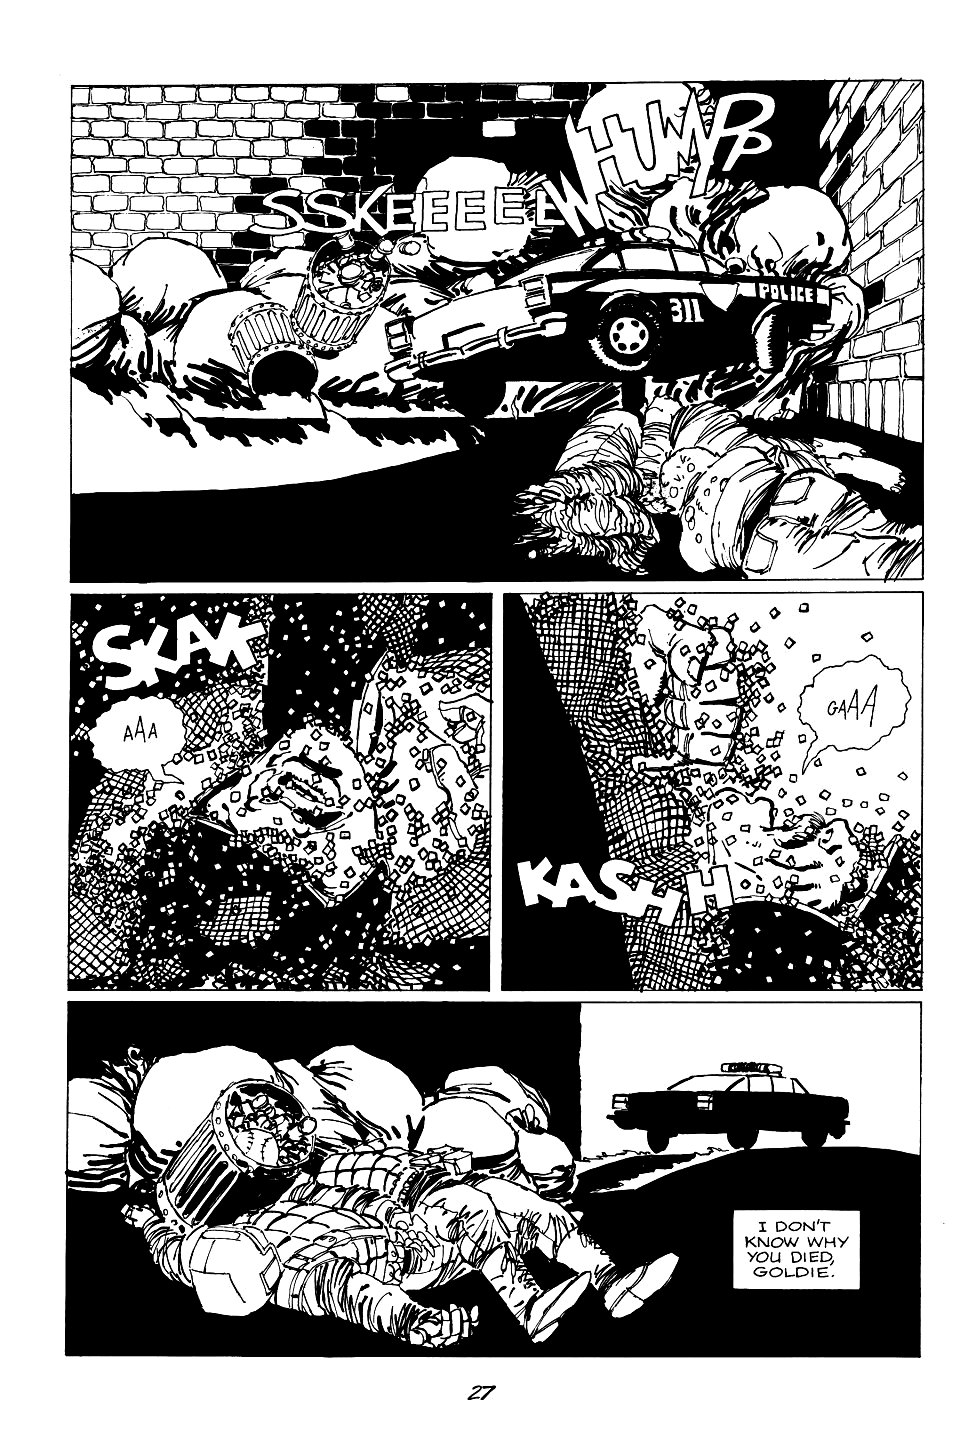 page 27 of sin city 1 the hard goodbye